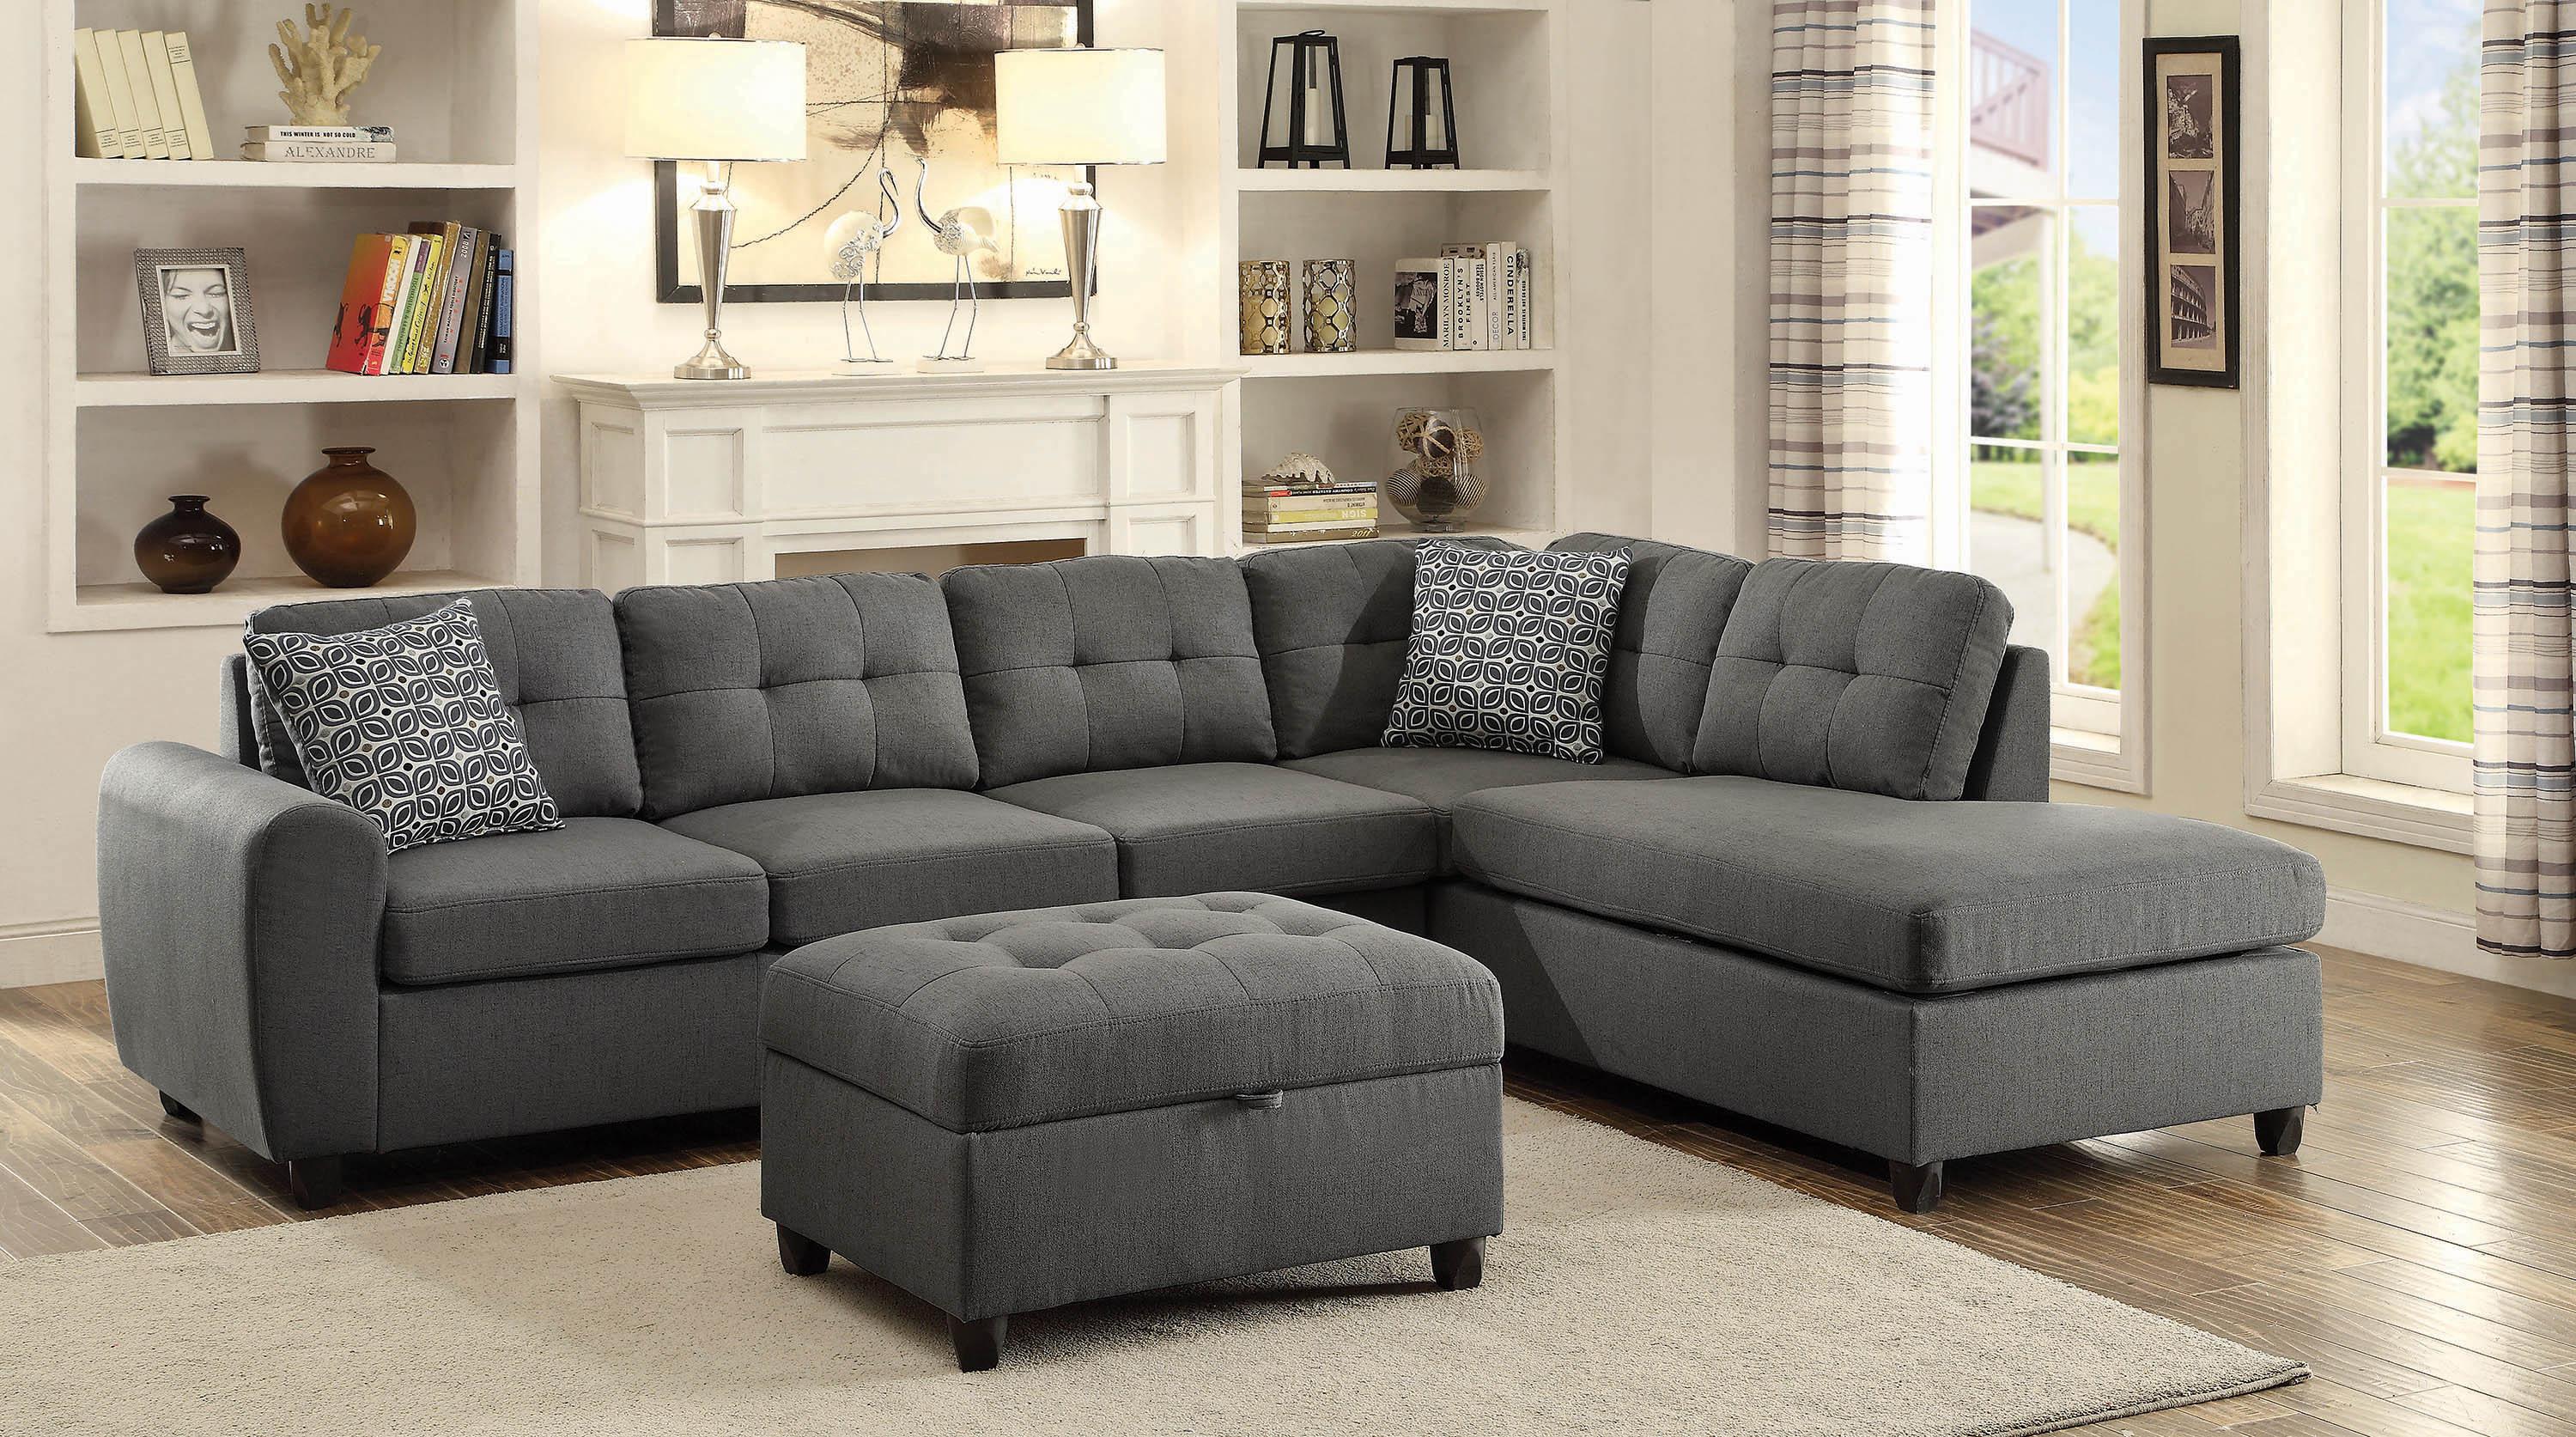 Transitional Sectional Set 500413-S2 Stonenesse 500413-S2 in Gray 